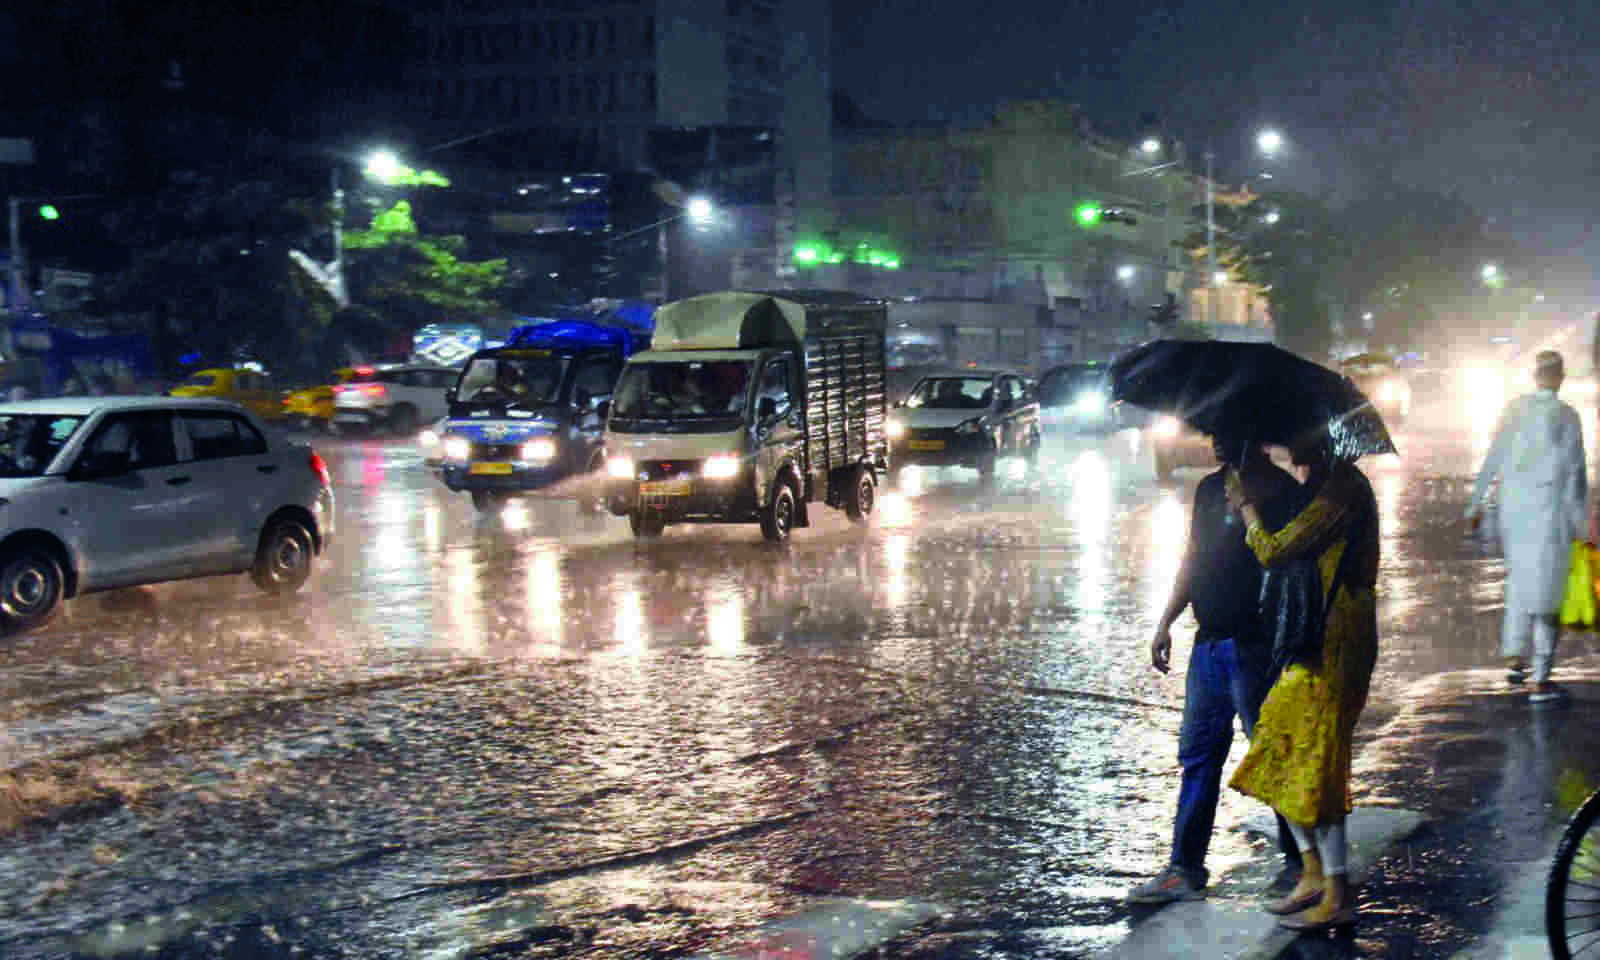 Intermittent rain hampers normal life in Kolkata and south Bengal districts